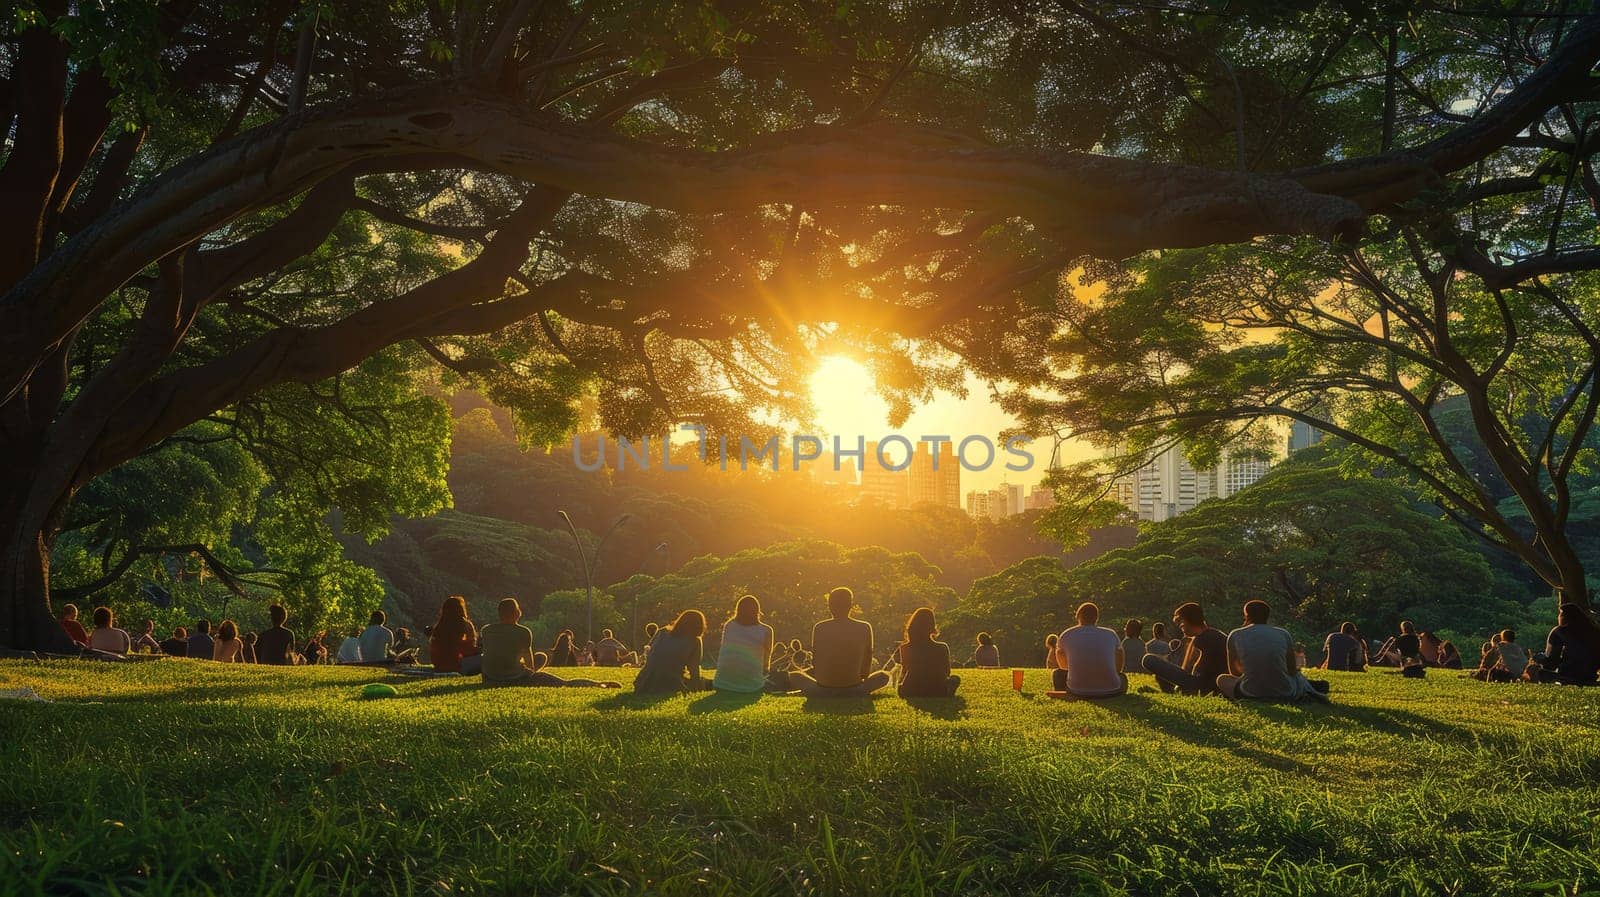 A group of people are sitting in a park under a large tree. The sun is setting, casting a warm glow over the scene. The atmosphere is peaceful and serene, as the people enjoy the beauty of nature